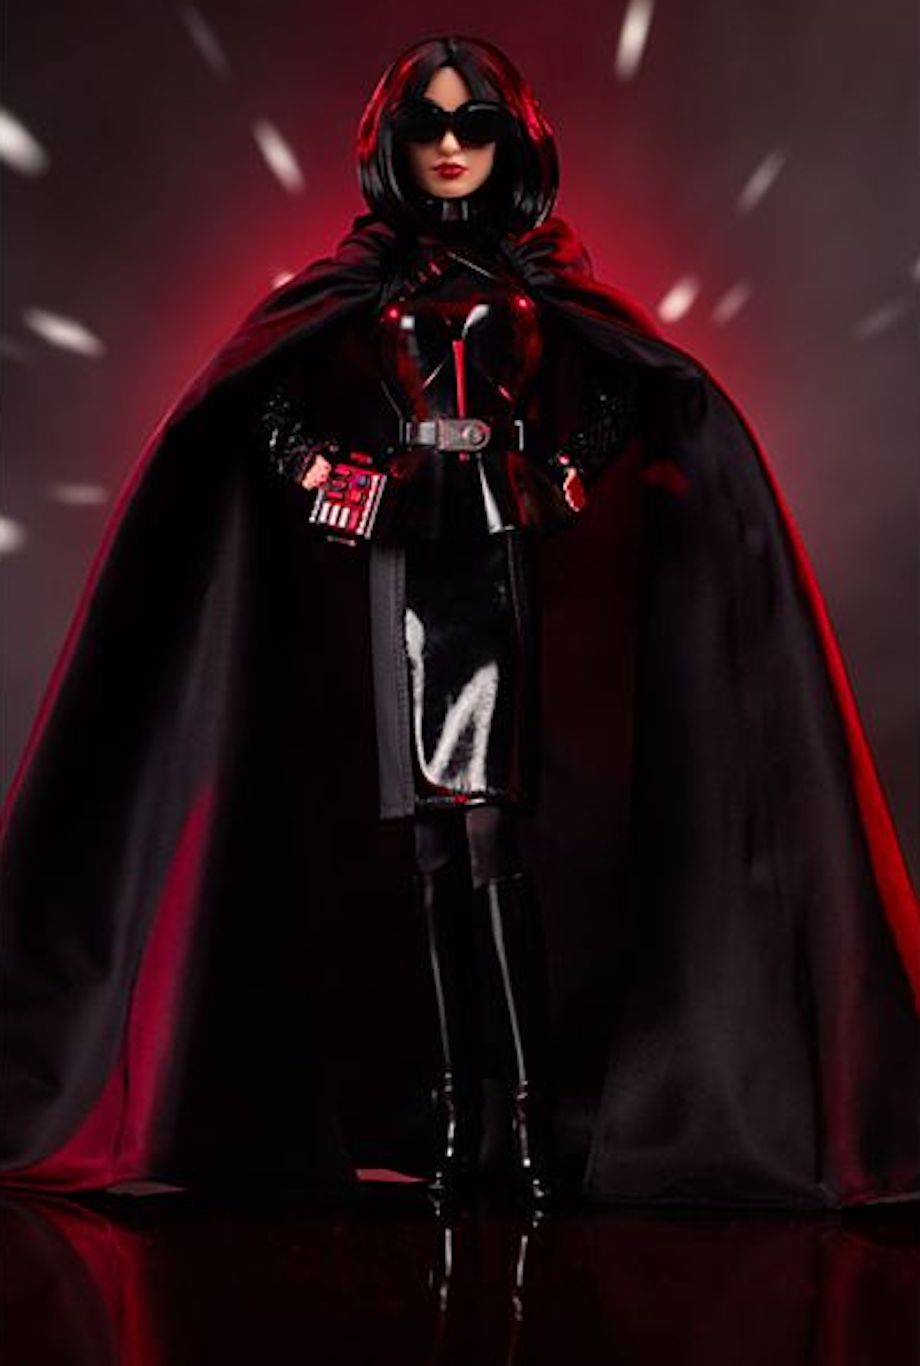 barbie-gets-a-line-of-star-wars-action-figures-that-shows-off-new-fashion-for-darth-vader-r2-d2-and-princess-leia1